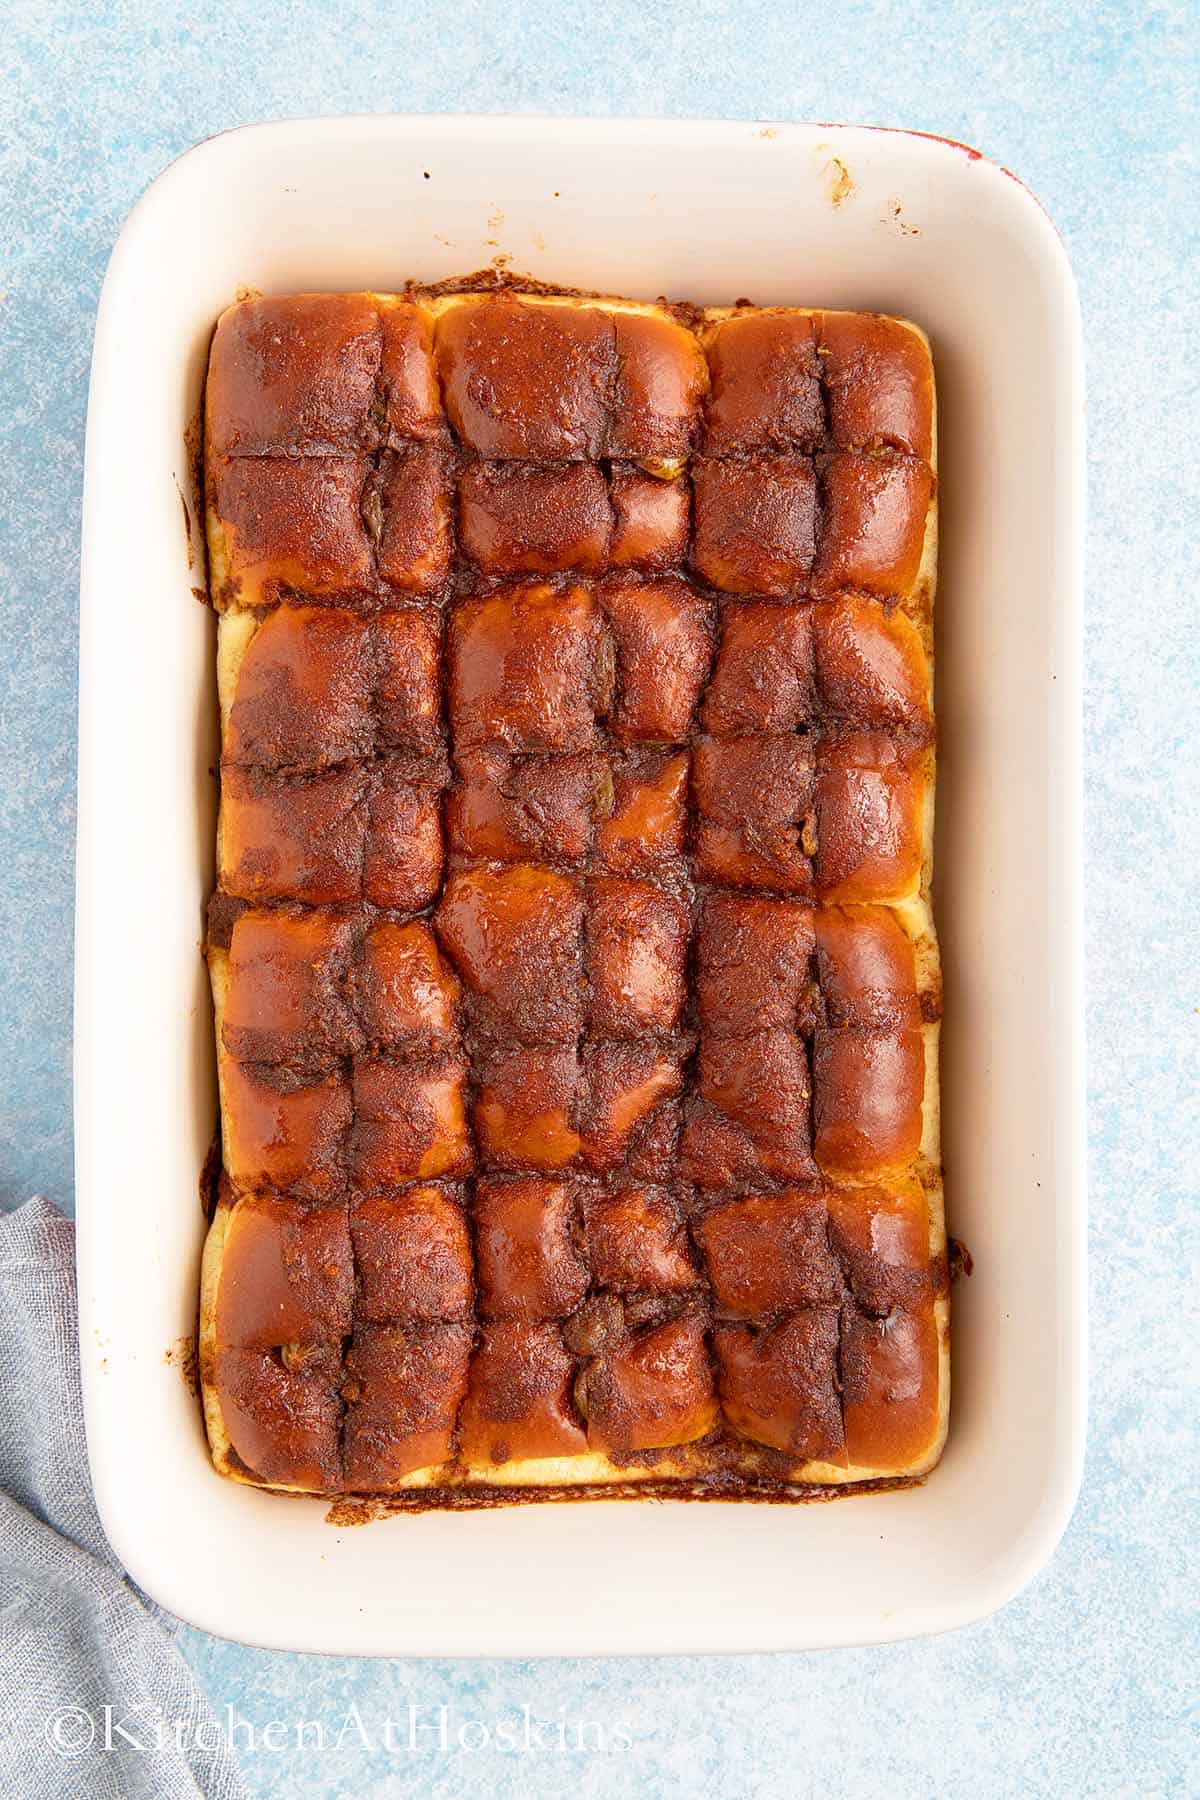 baked hot cross buns in a red rectangle baking dish.